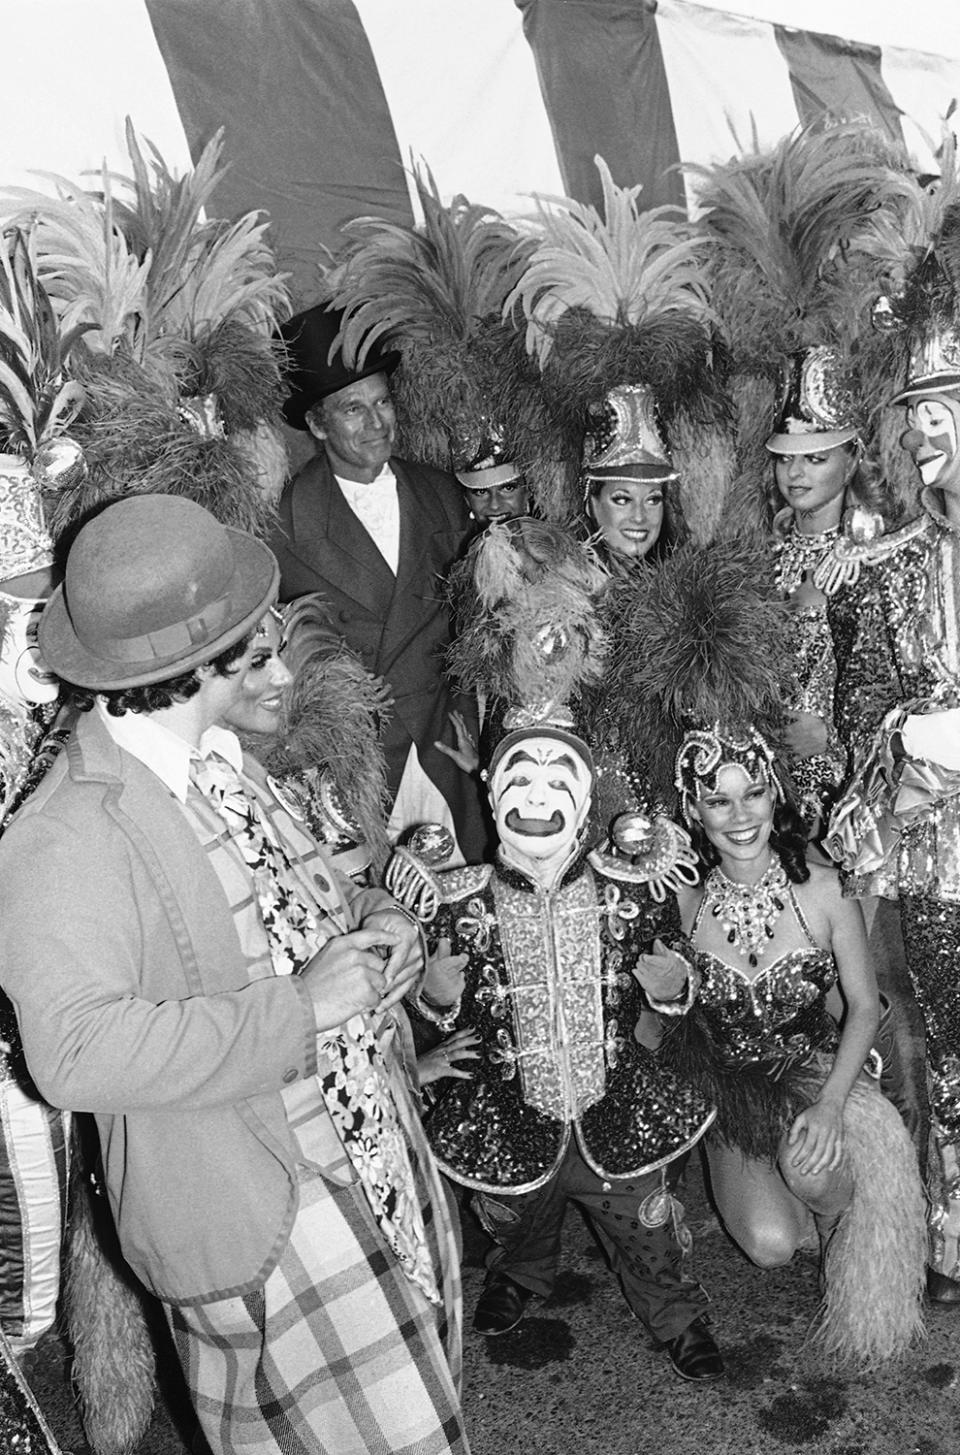 <p>Actor Charlton Heston is shown with Ringling Bros. and Barnum and Bailey Circus clown Prince Paul on Tuesday, July 19, 1978 during the City of Hope’s Celebrity Circus opening in Inglewood, California. Heston played the ringmaster in the original motion picture “The Greatest Show on Earth.” (AP Photo/Mclendon) </p>